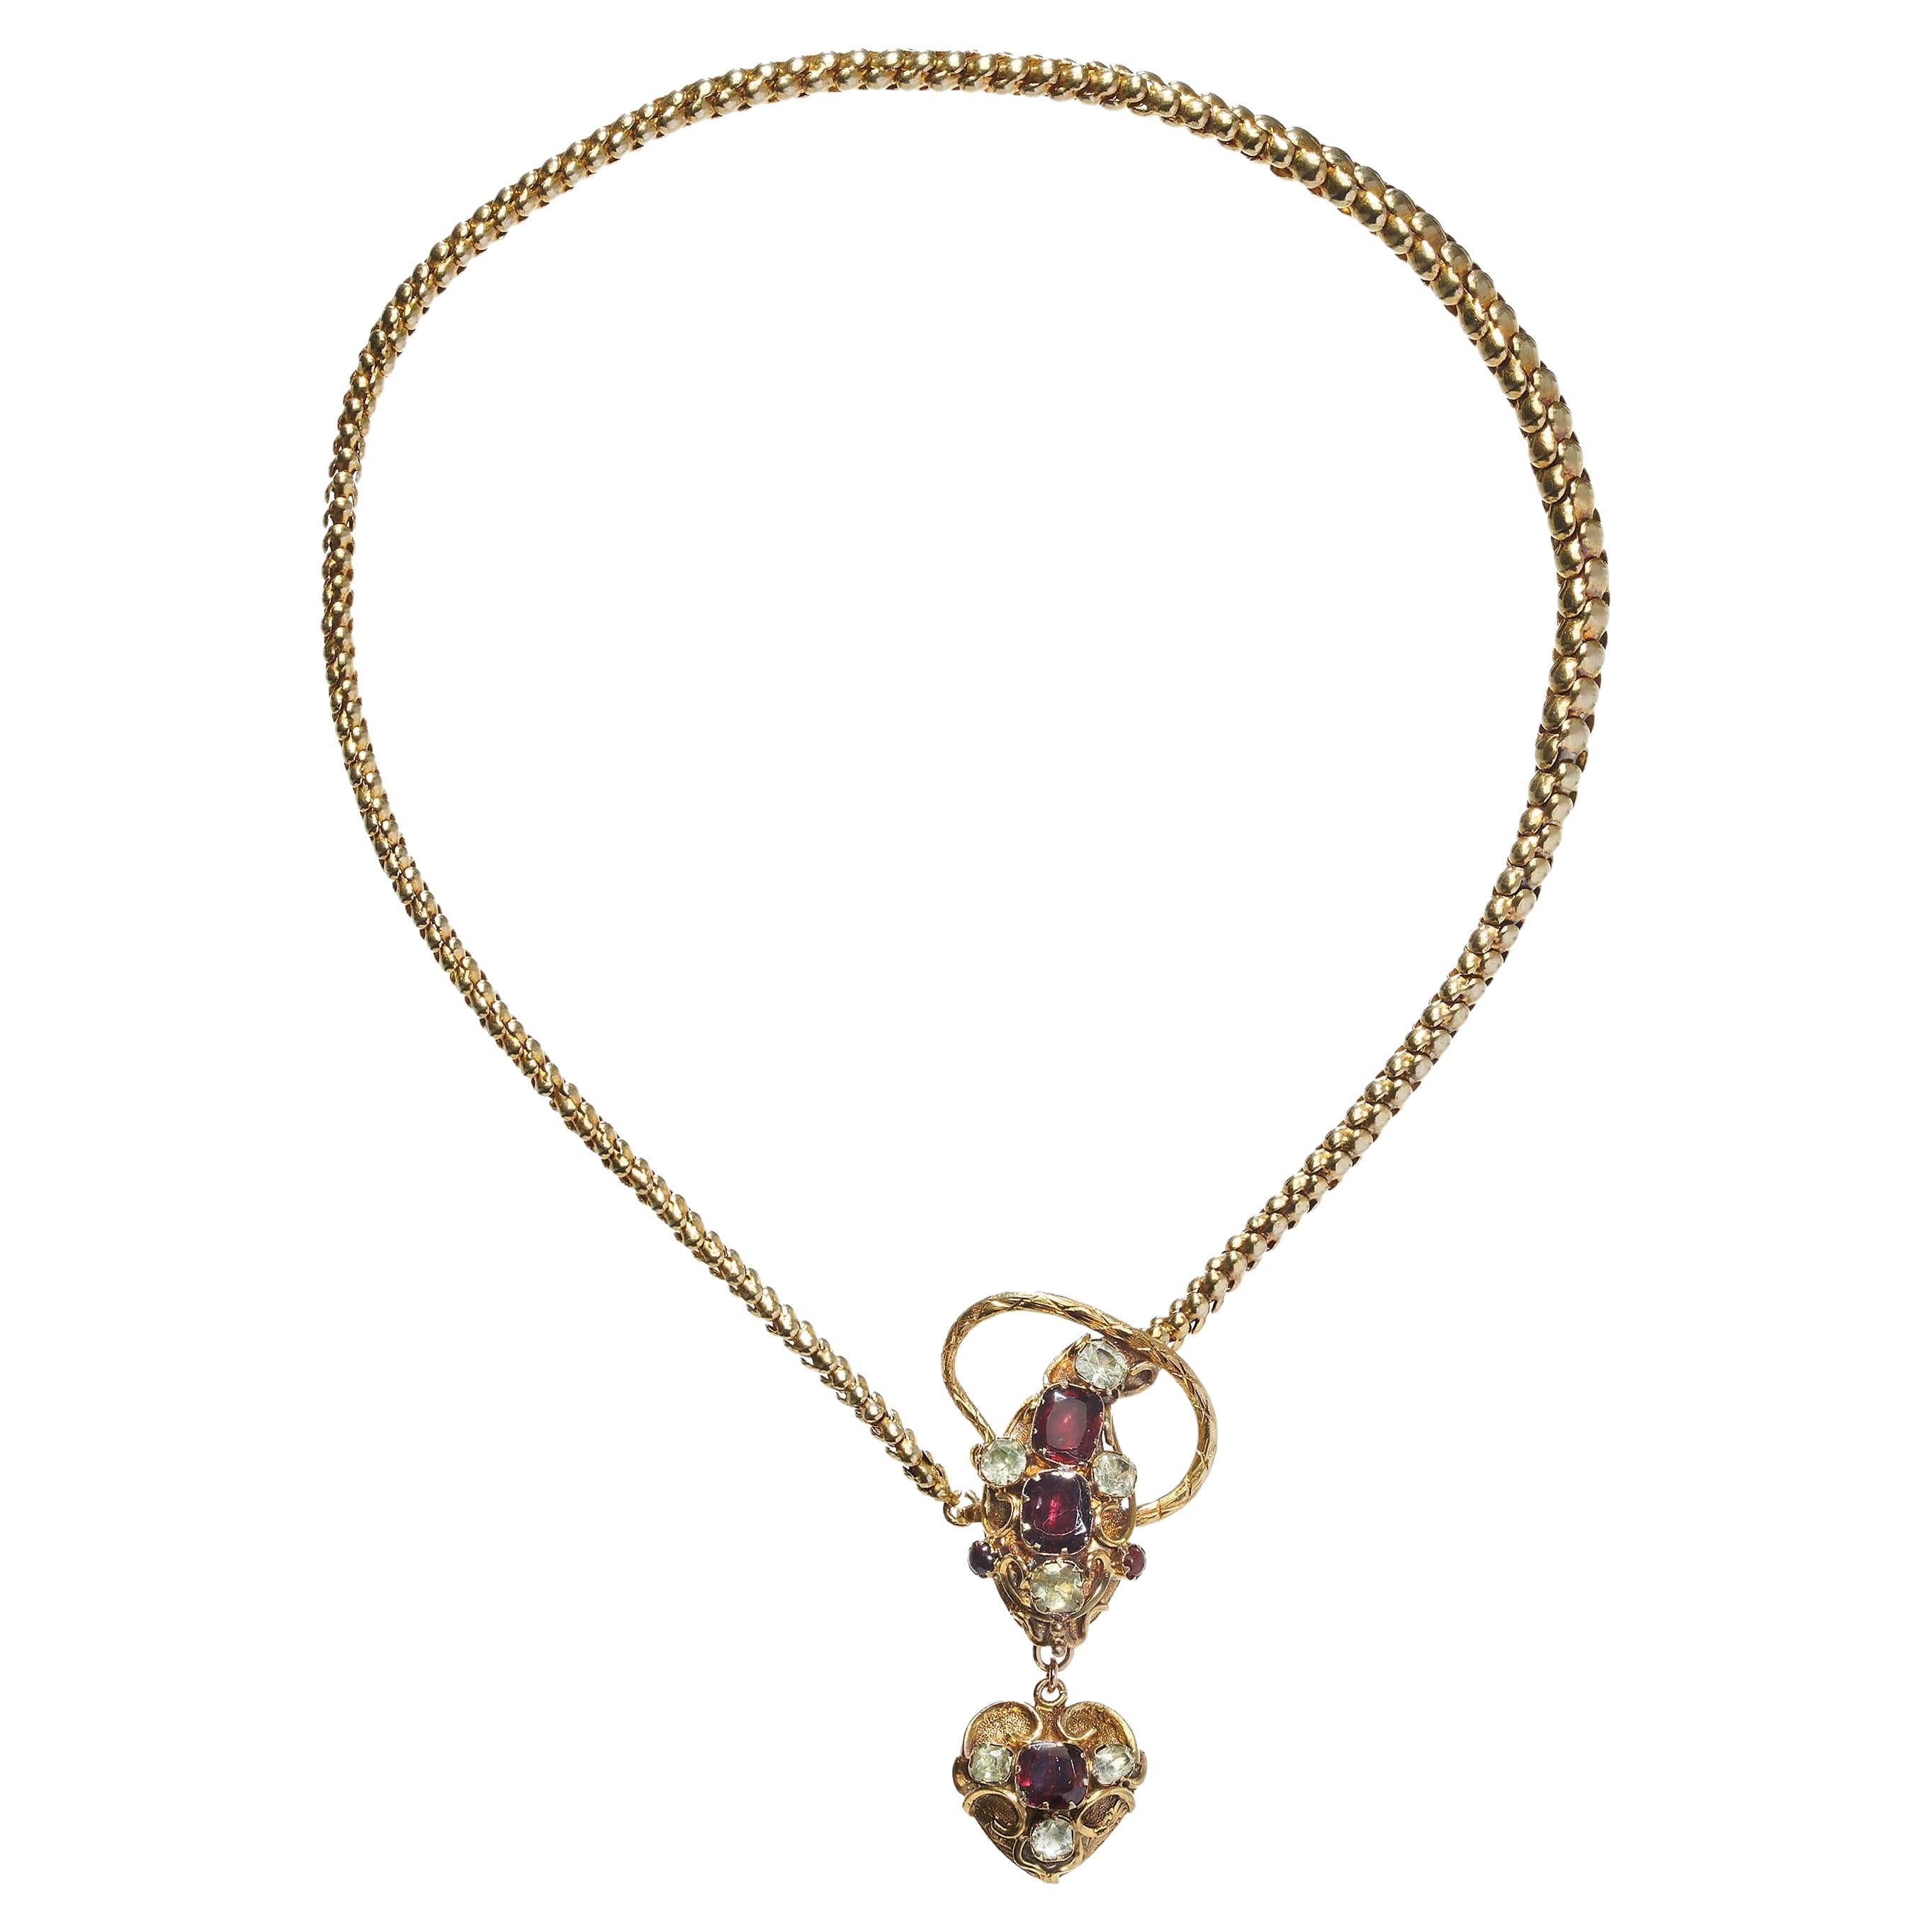 Antique Garnet, Beryl and Gold Snake Necklace, Circa 1840 For Sale